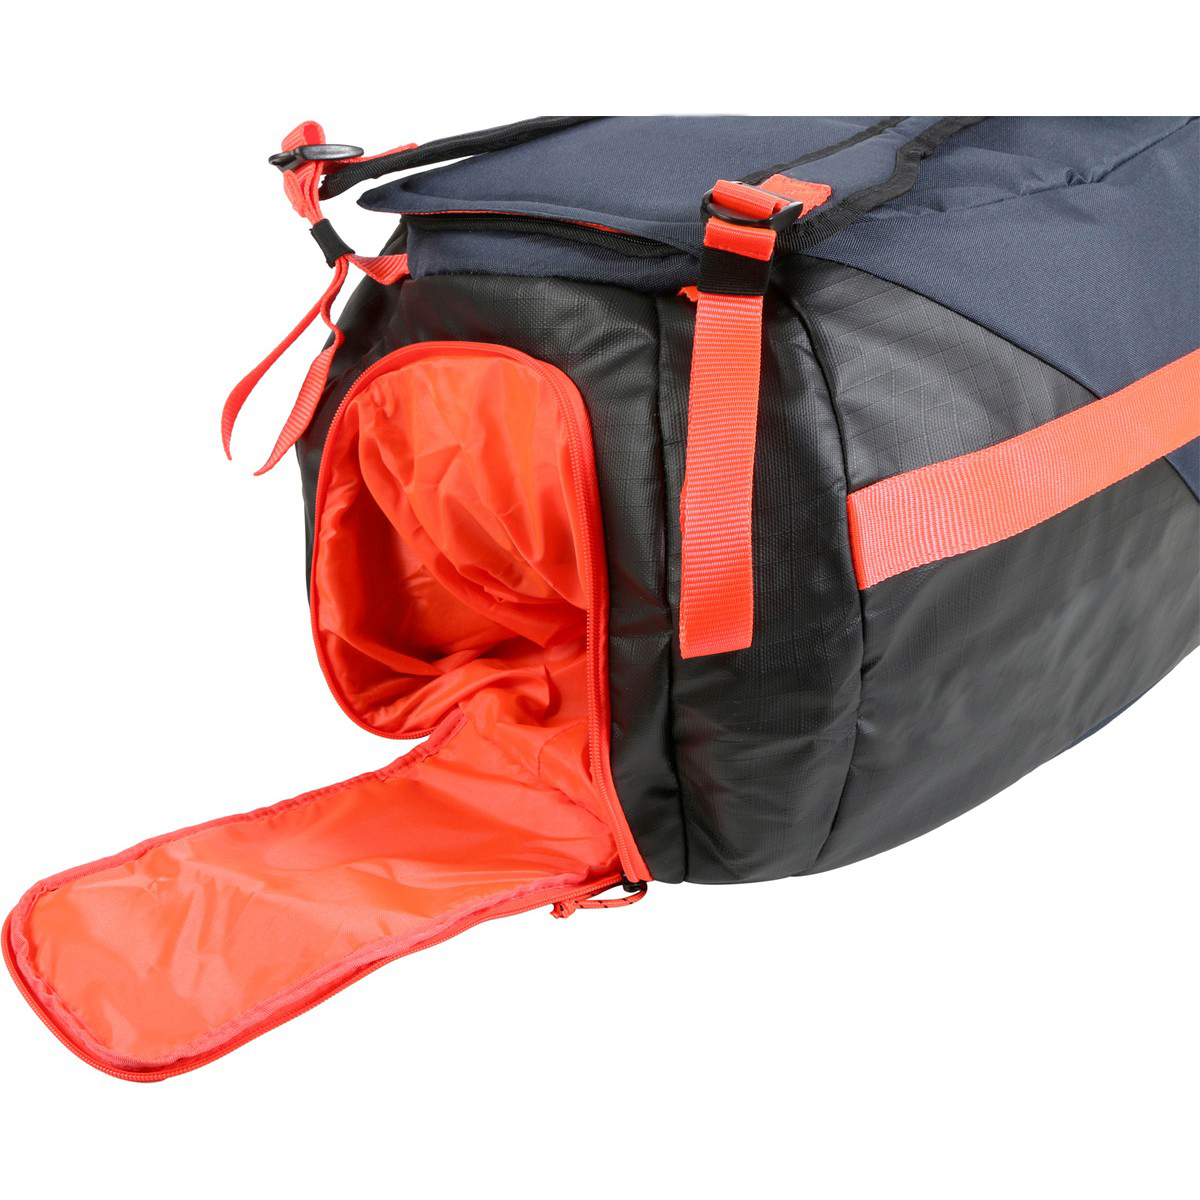 Gym Duffle Bag for Women Men Sports Bags Travel Duffel Bags with Shoe Compartment